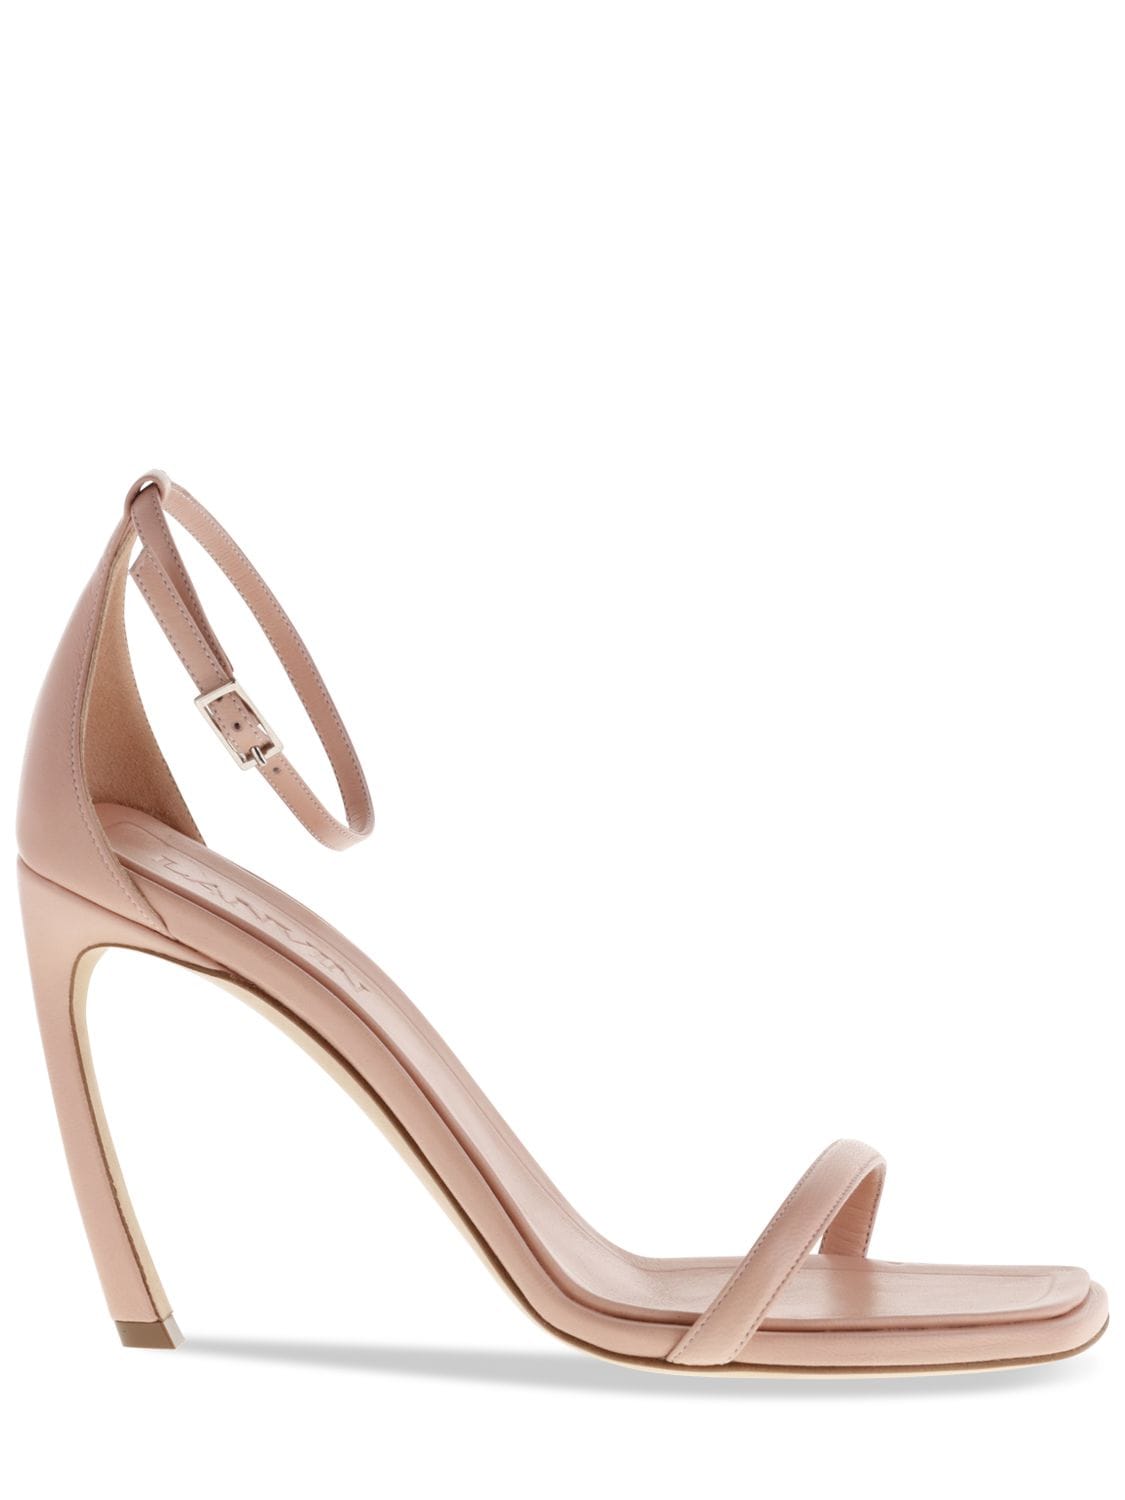 Lanvin 95mm Swing Leather Sandals In Nude